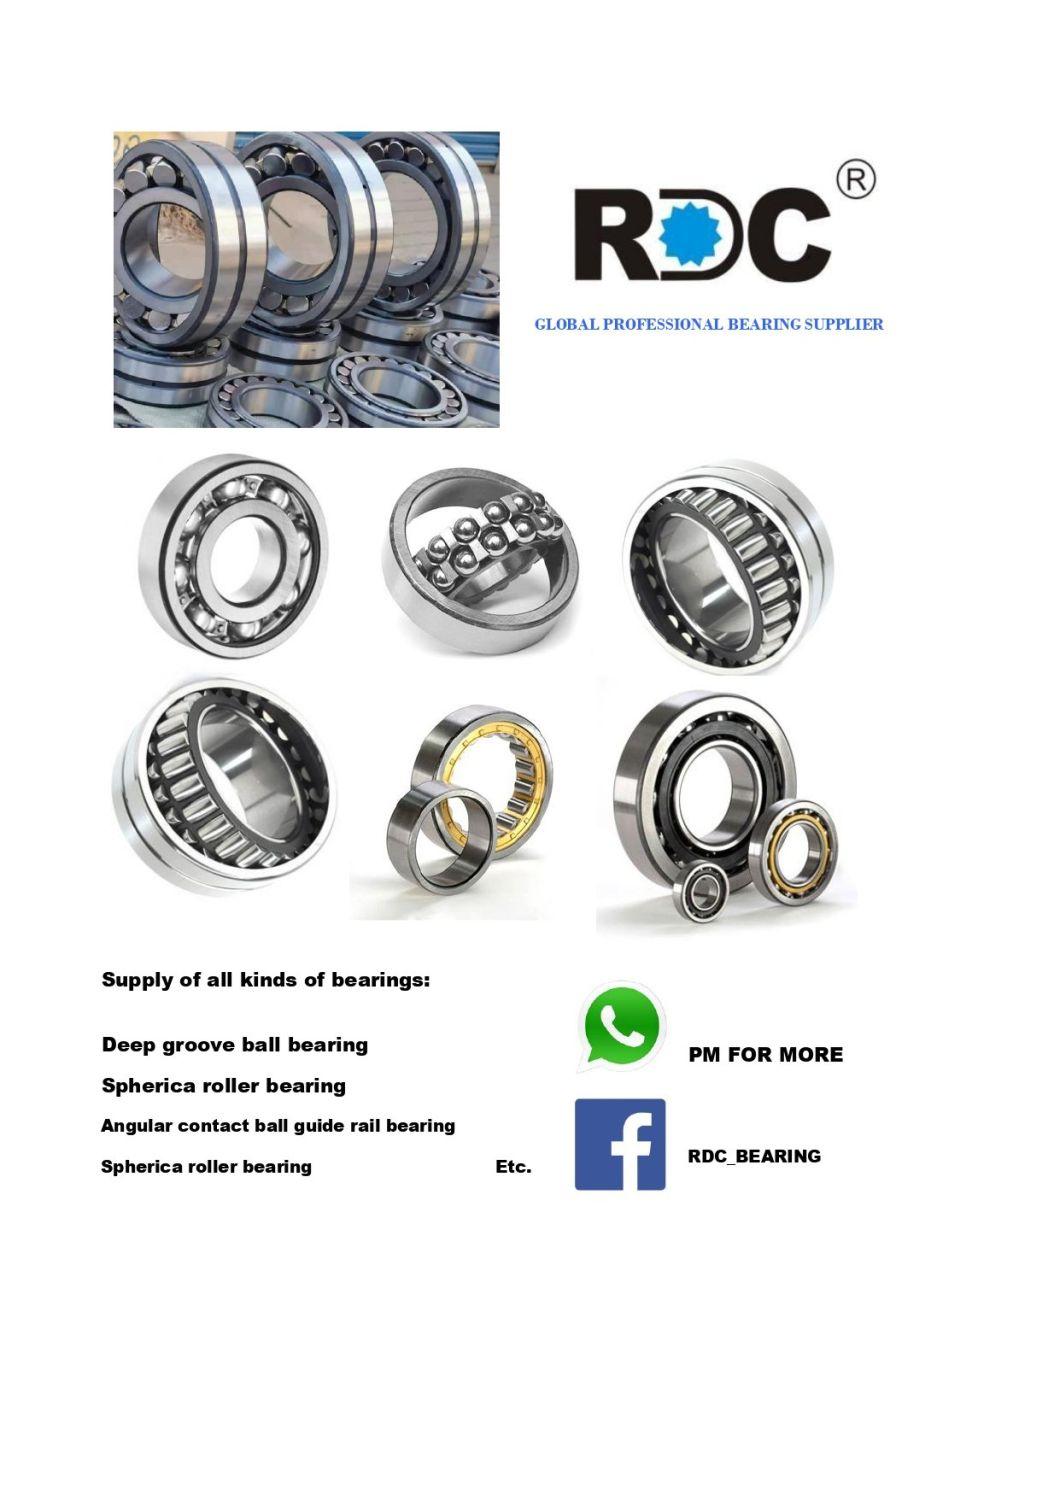 Quality Factory Sale 30205 30206 30207 30208 30209 30210 Taper Roller Bearing